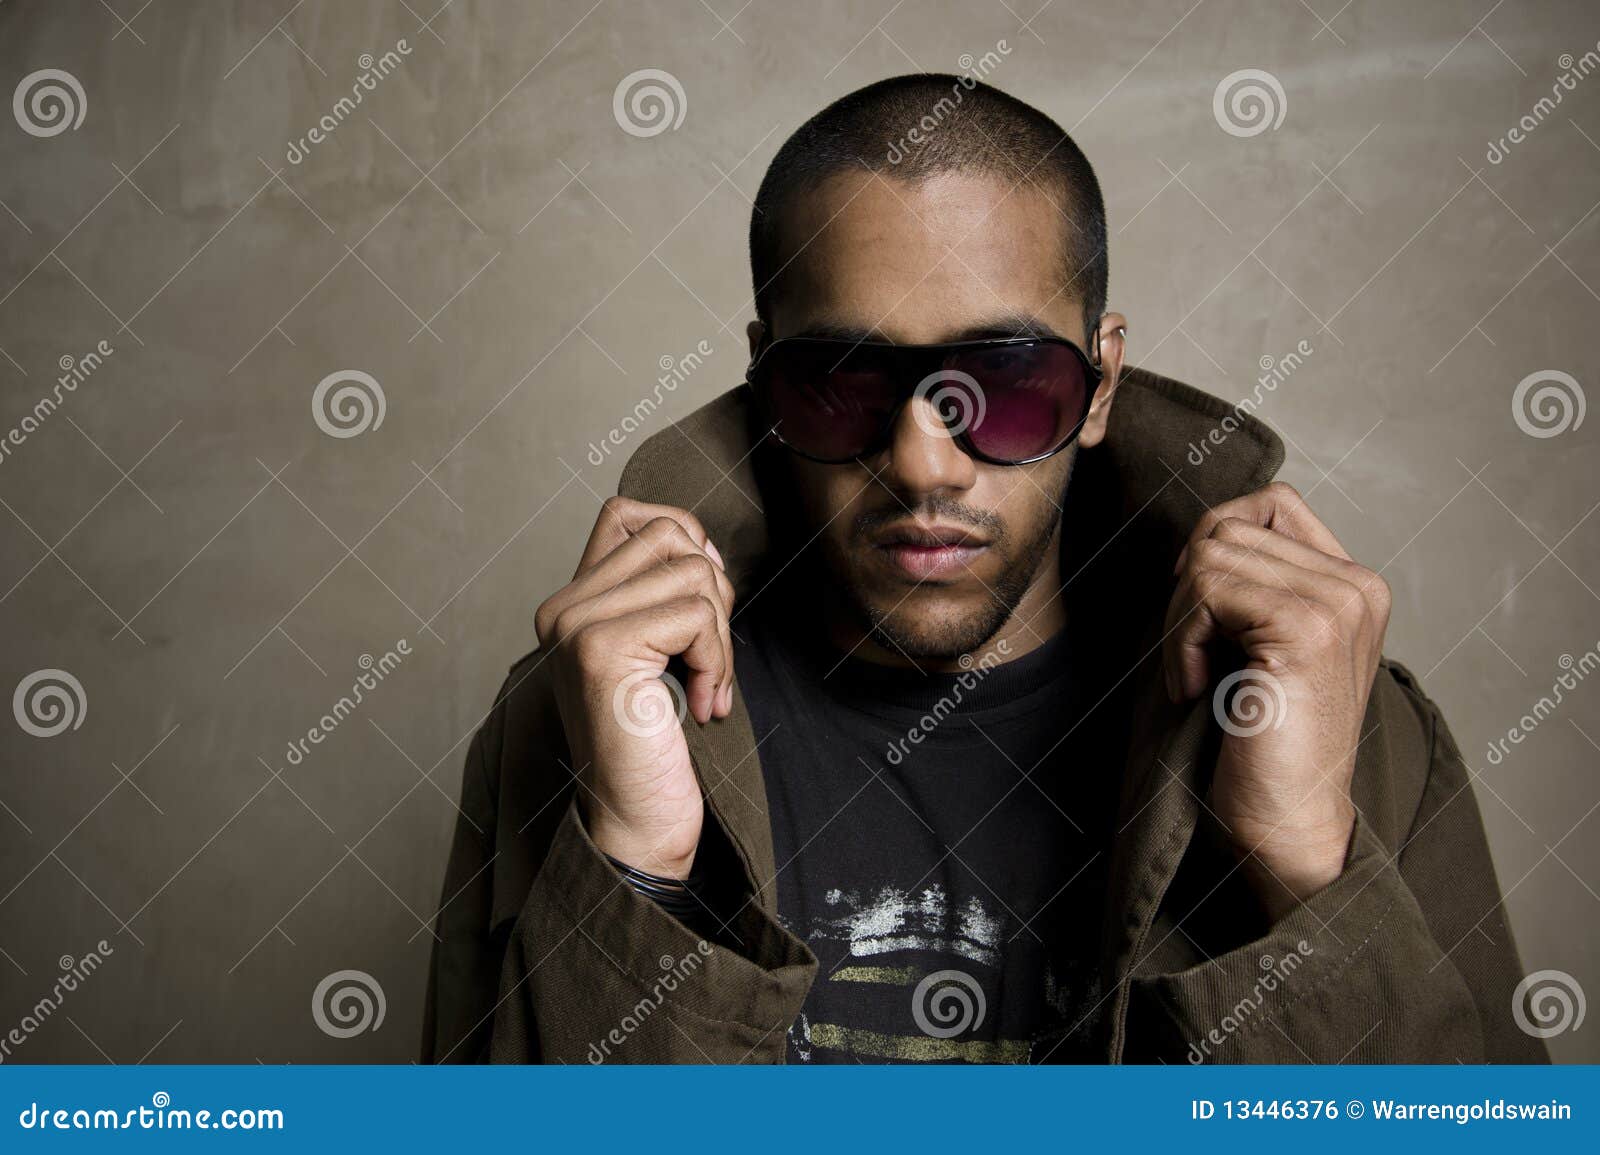 Popped collar stock photo. Image of adult - 13446376